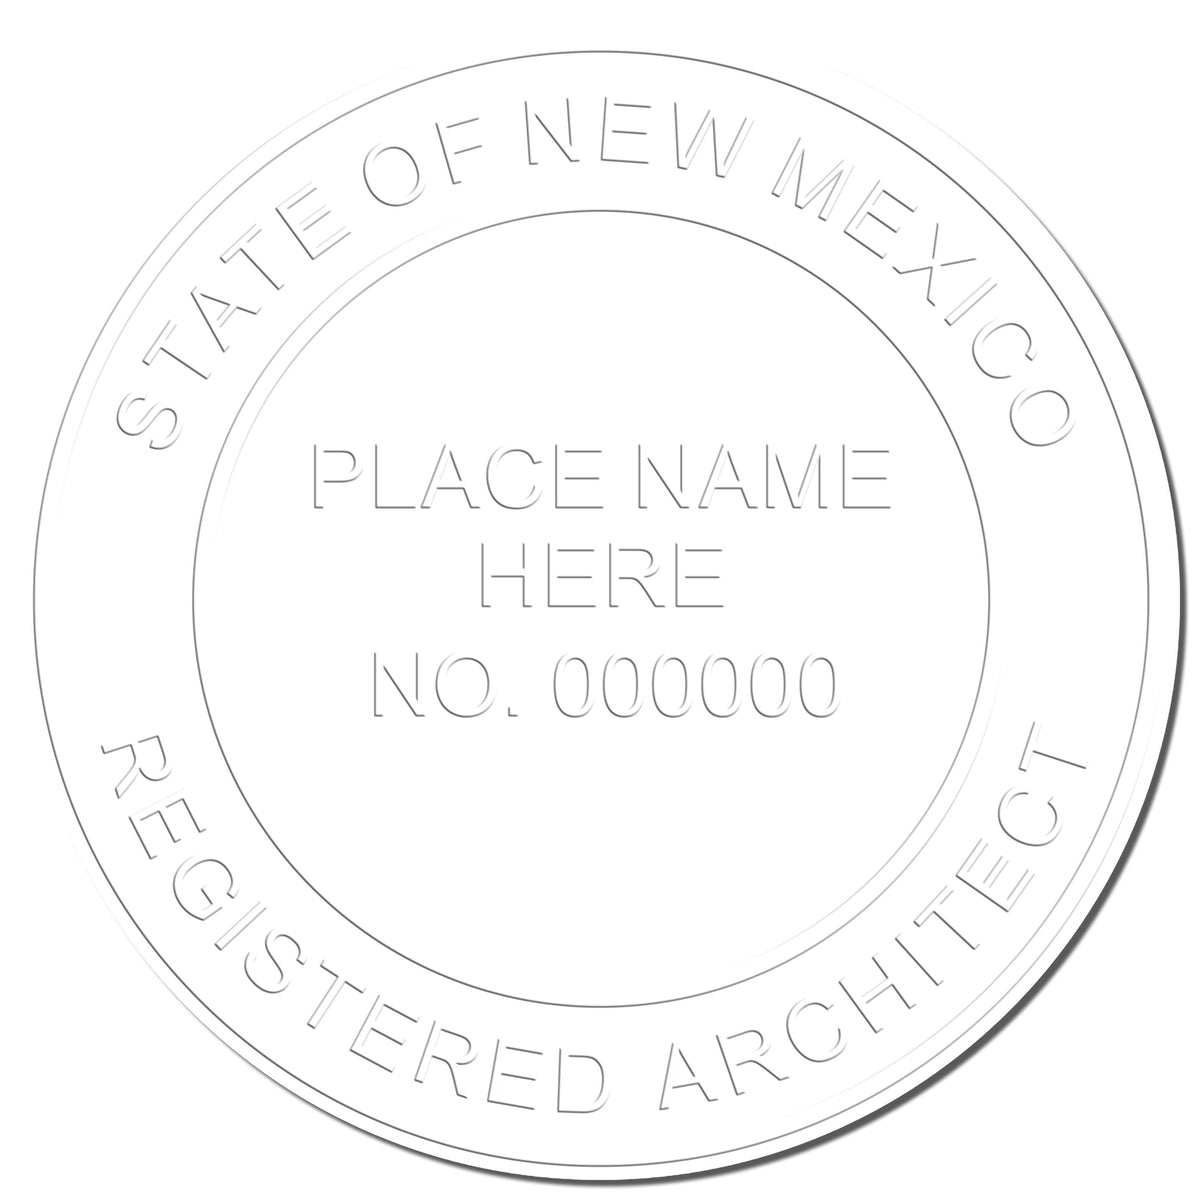 This paper is stamped with a sample imprint of the Hybrid New Mexico Architect Seal, signifying its quality and reliability.